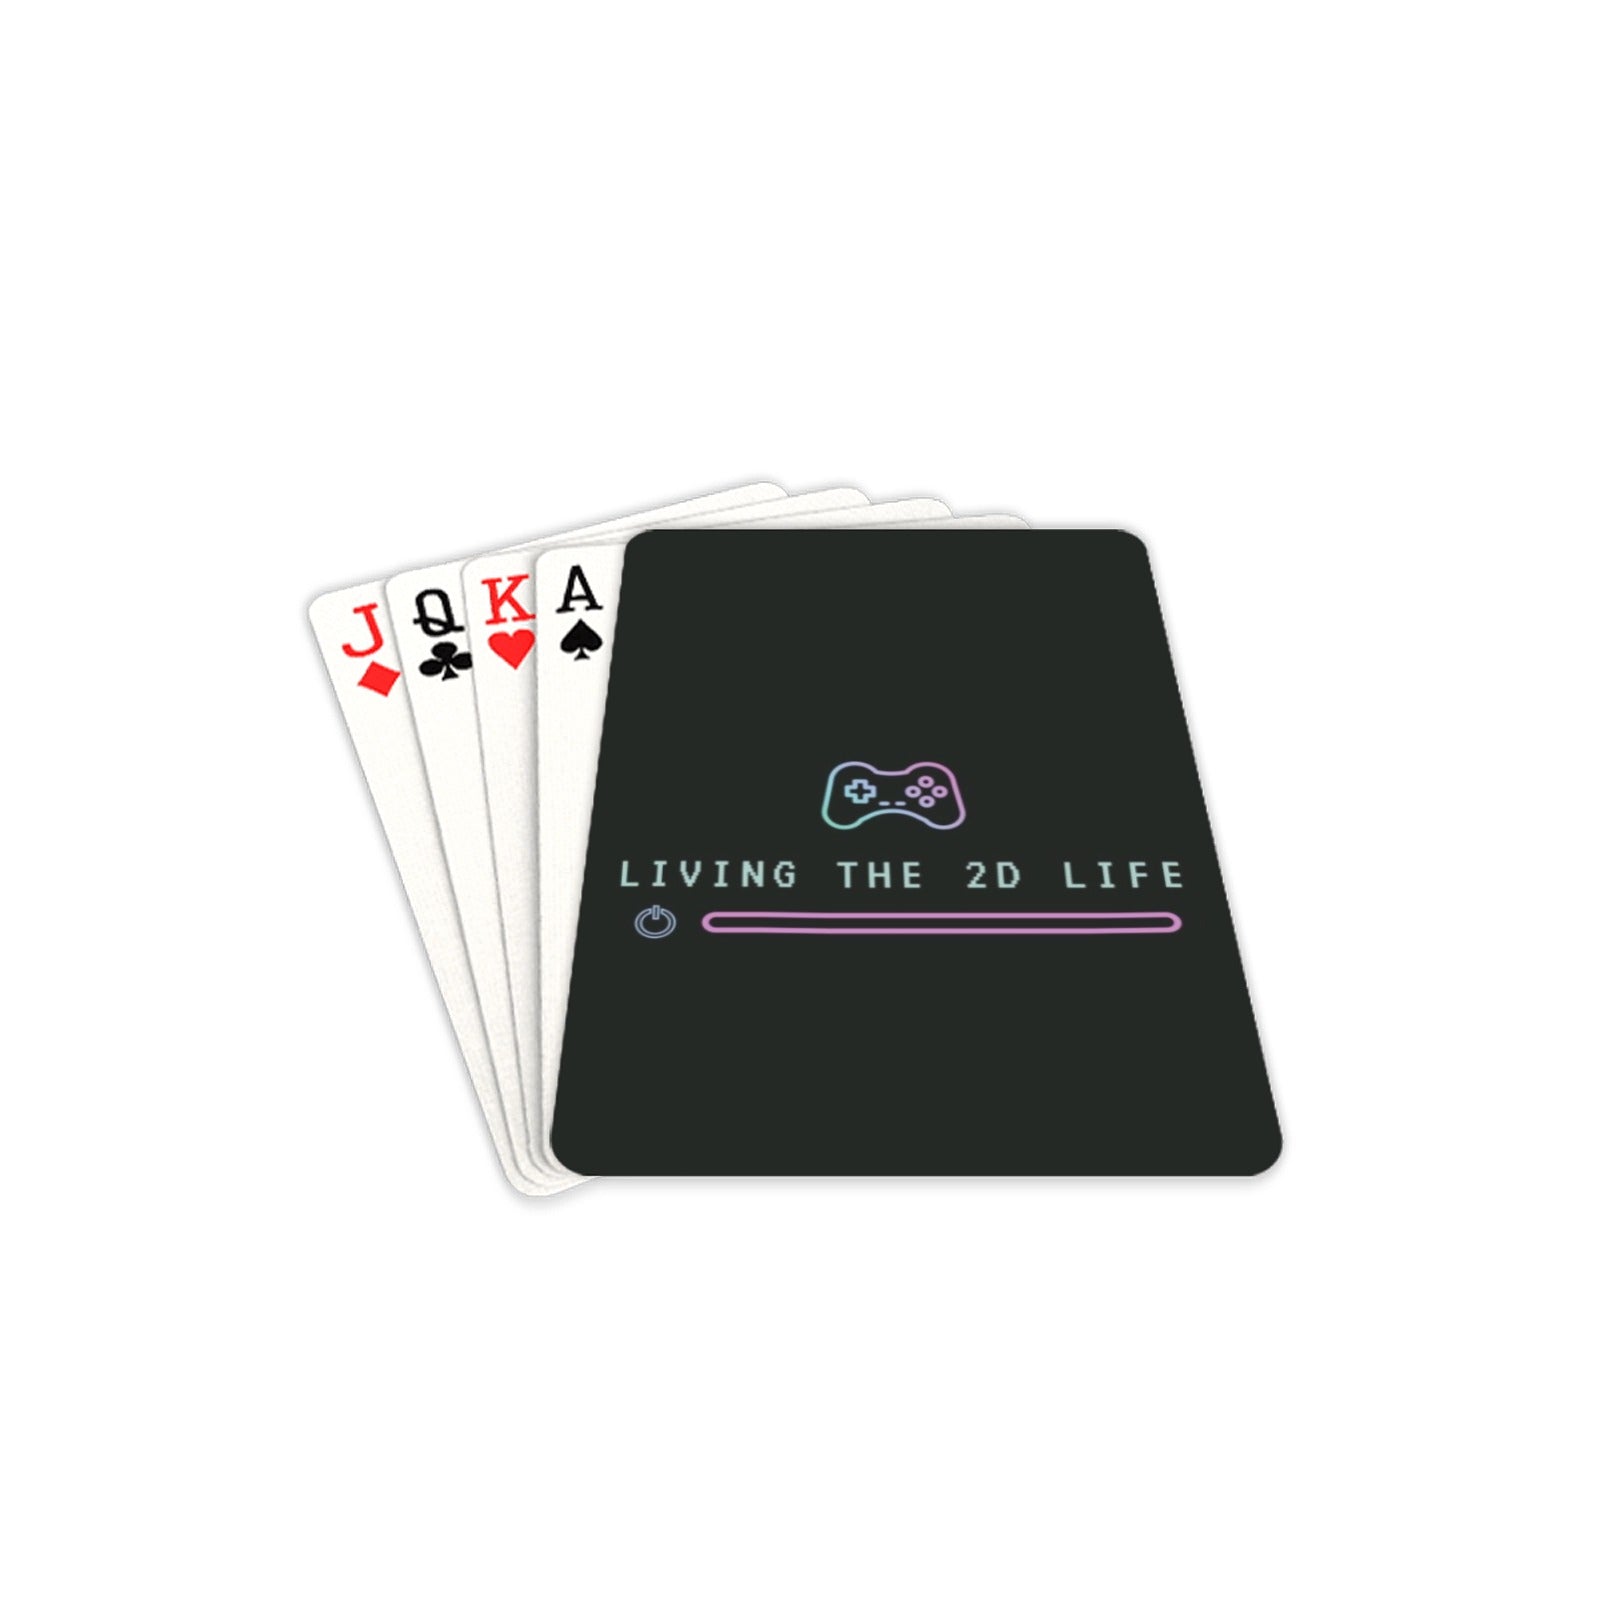 Living The 2D Life - Playing Cards 2.5"x3.5" Playing Card 2.5"x3.5"